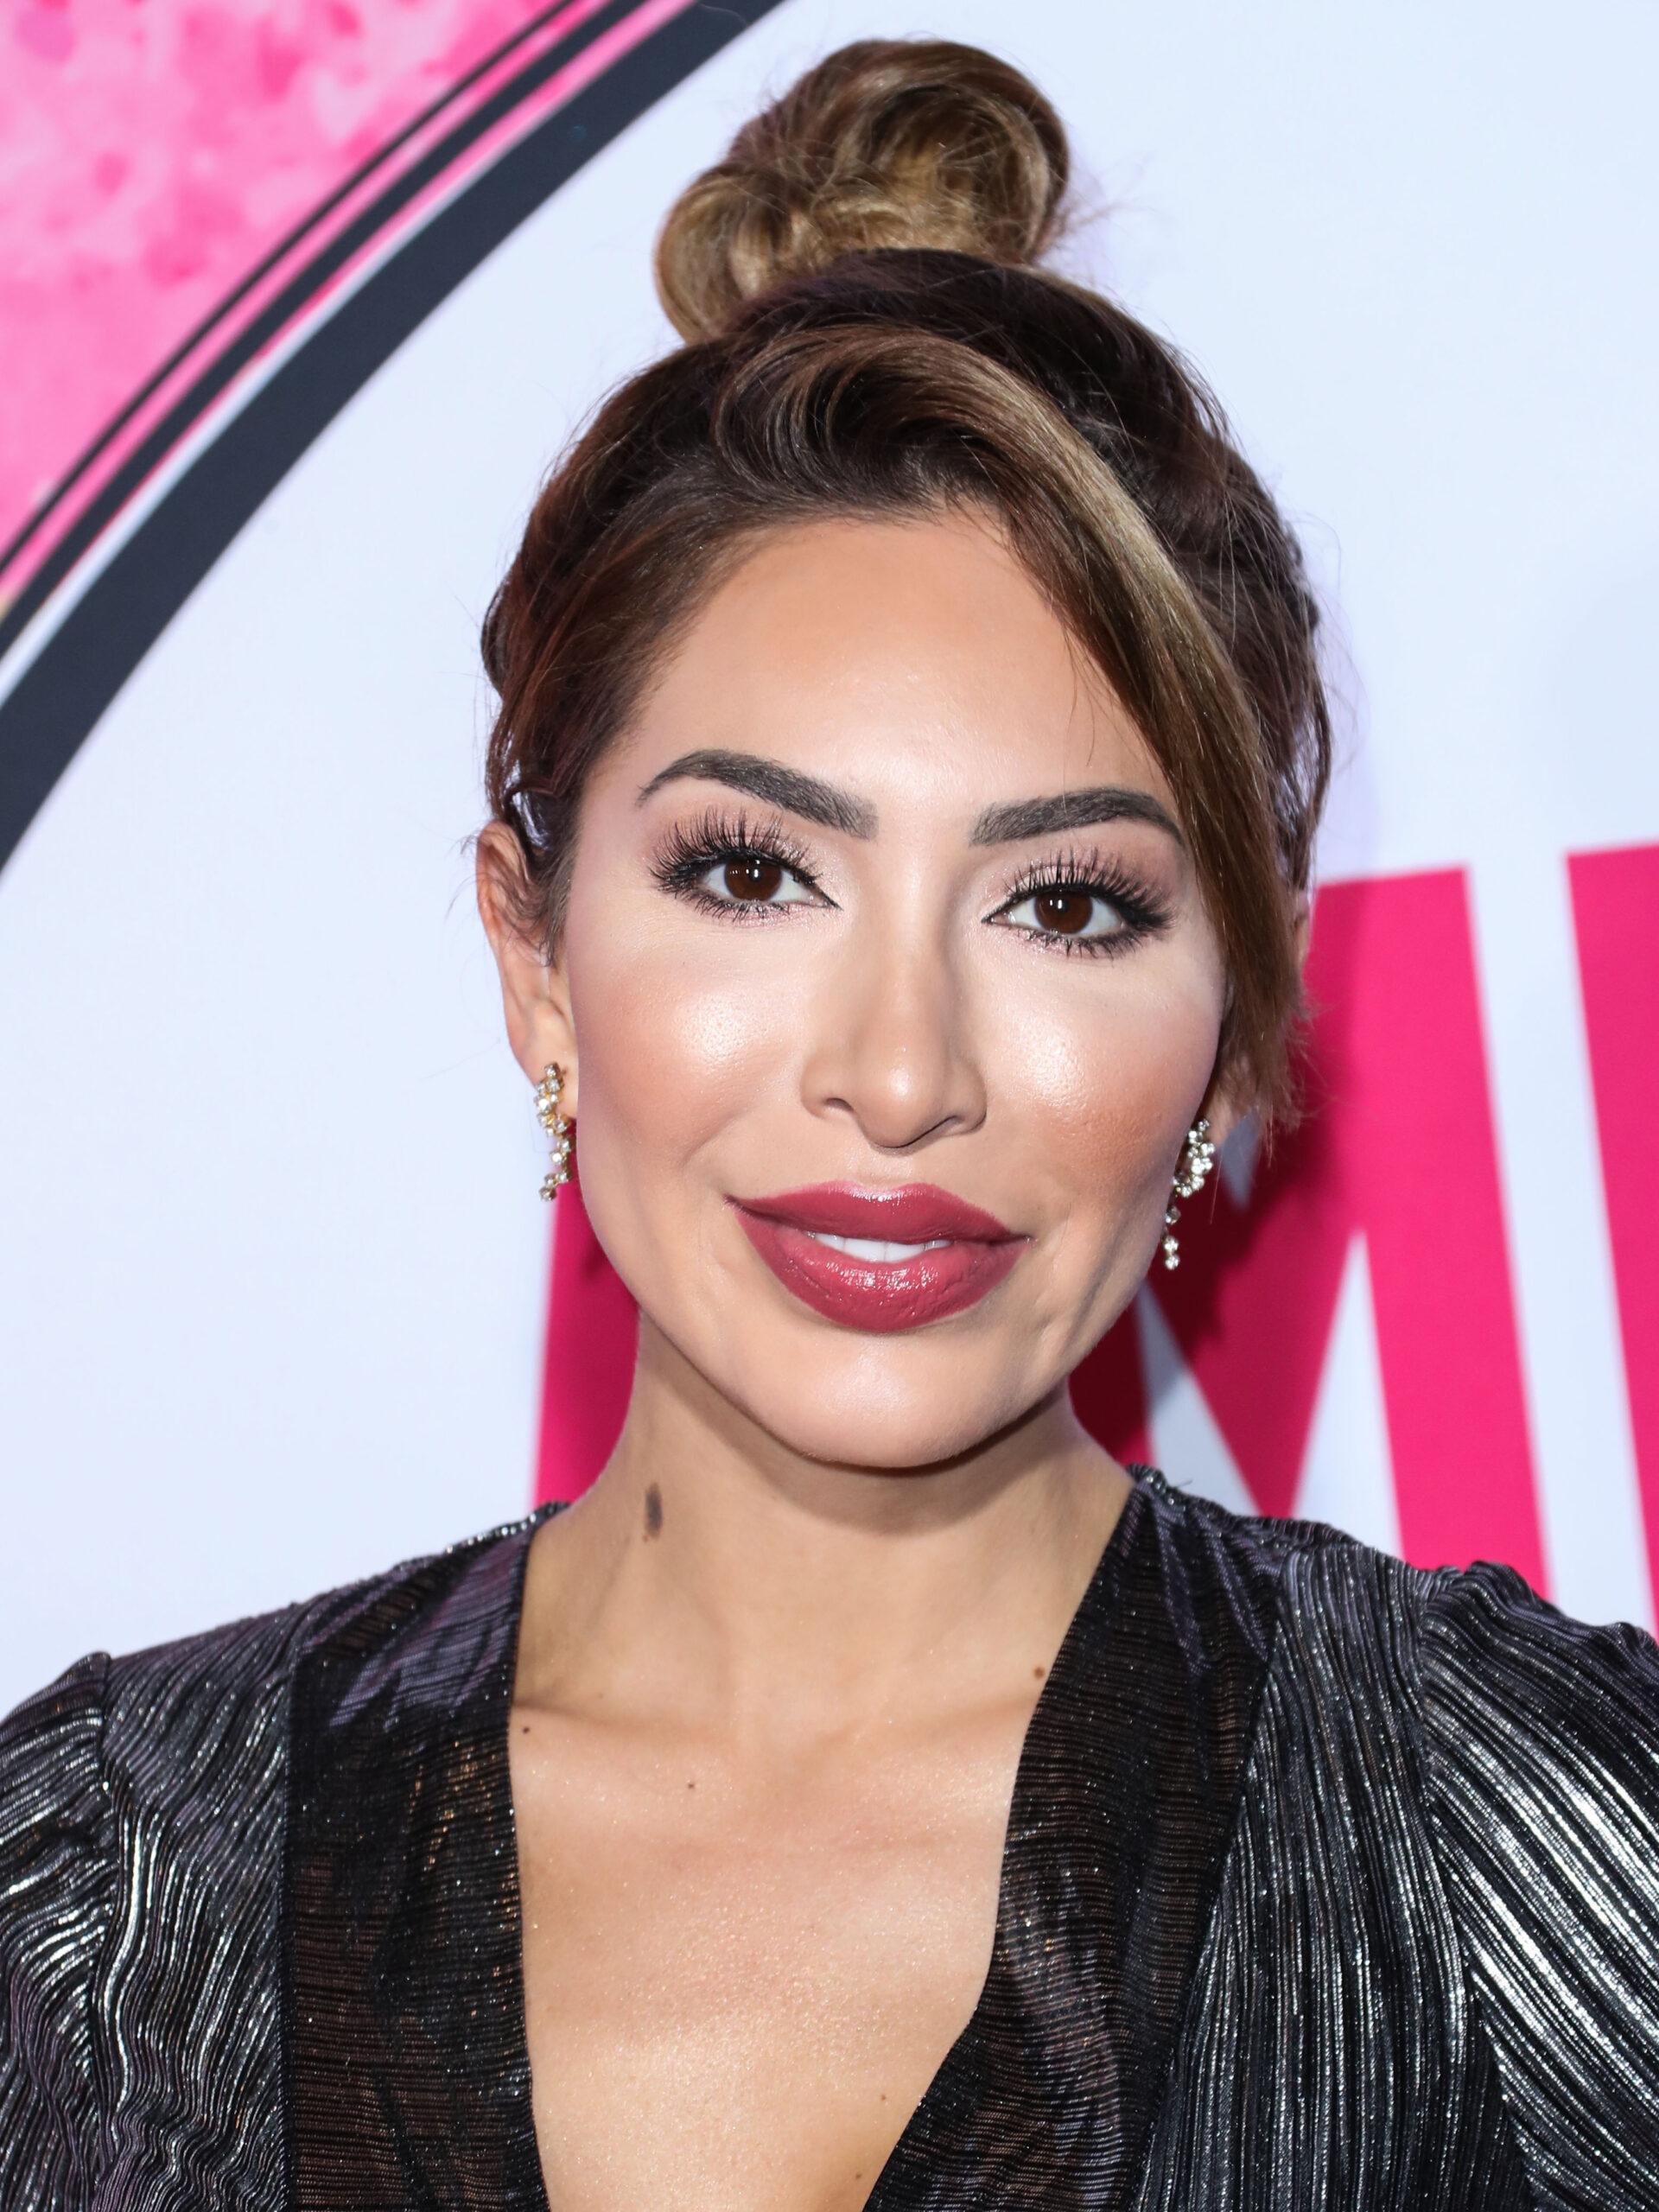 Farrah Abraham Sued For Allegedly Assaulting A Security Guard